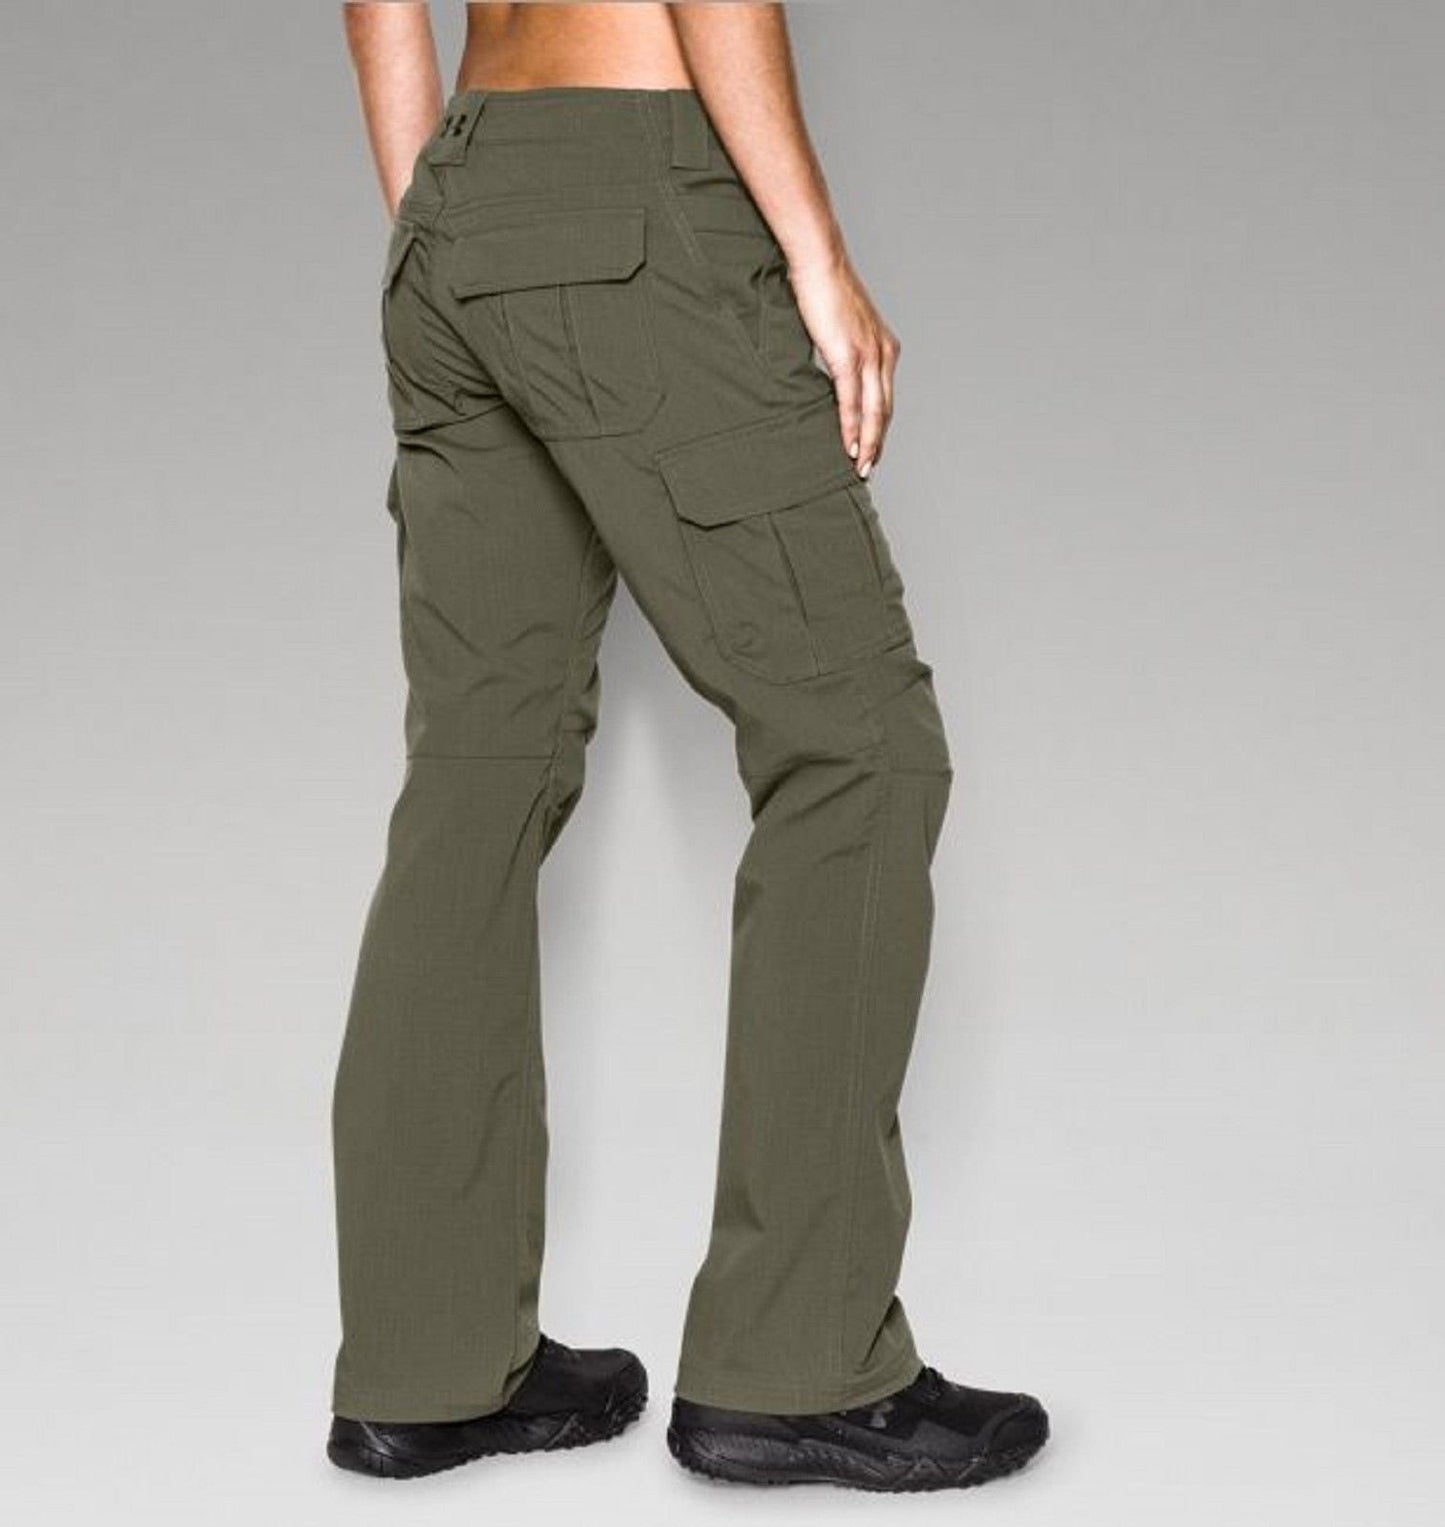 Under Armour Womens Tactical Patrol Pant - UA Loose-Fit Field Duty Cargo Pants